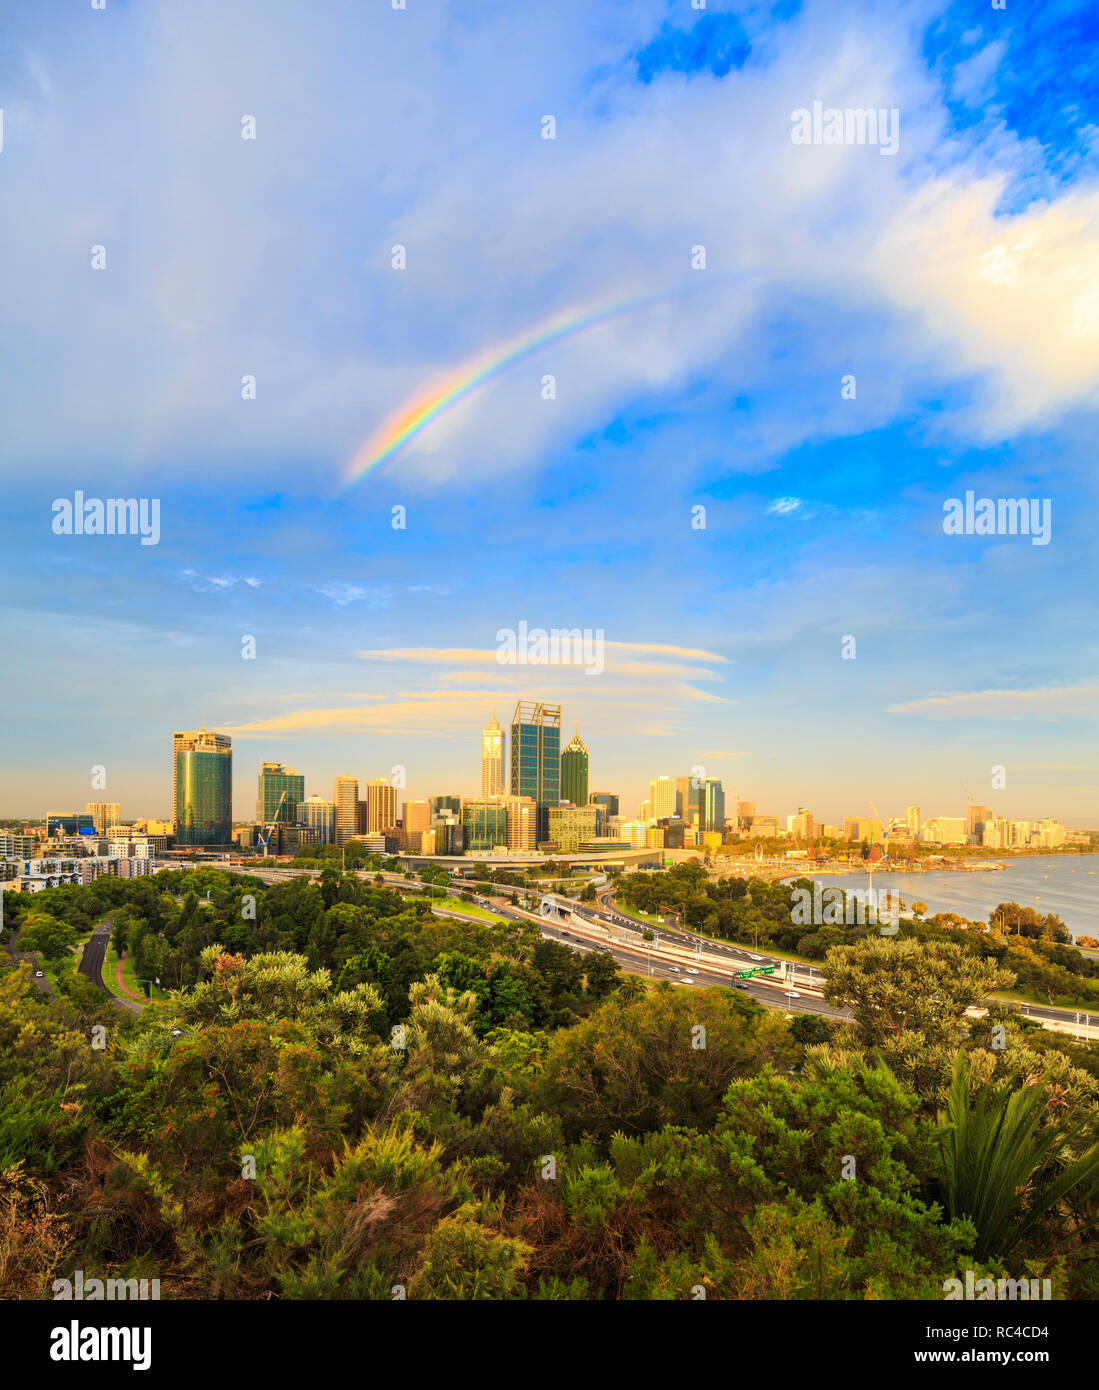 Perth Australia. The city glowing in the late afternoon sun with a rainbow overhead as viewed from the lookout in  Kings Park, Perth,Western Australia Stock Photo